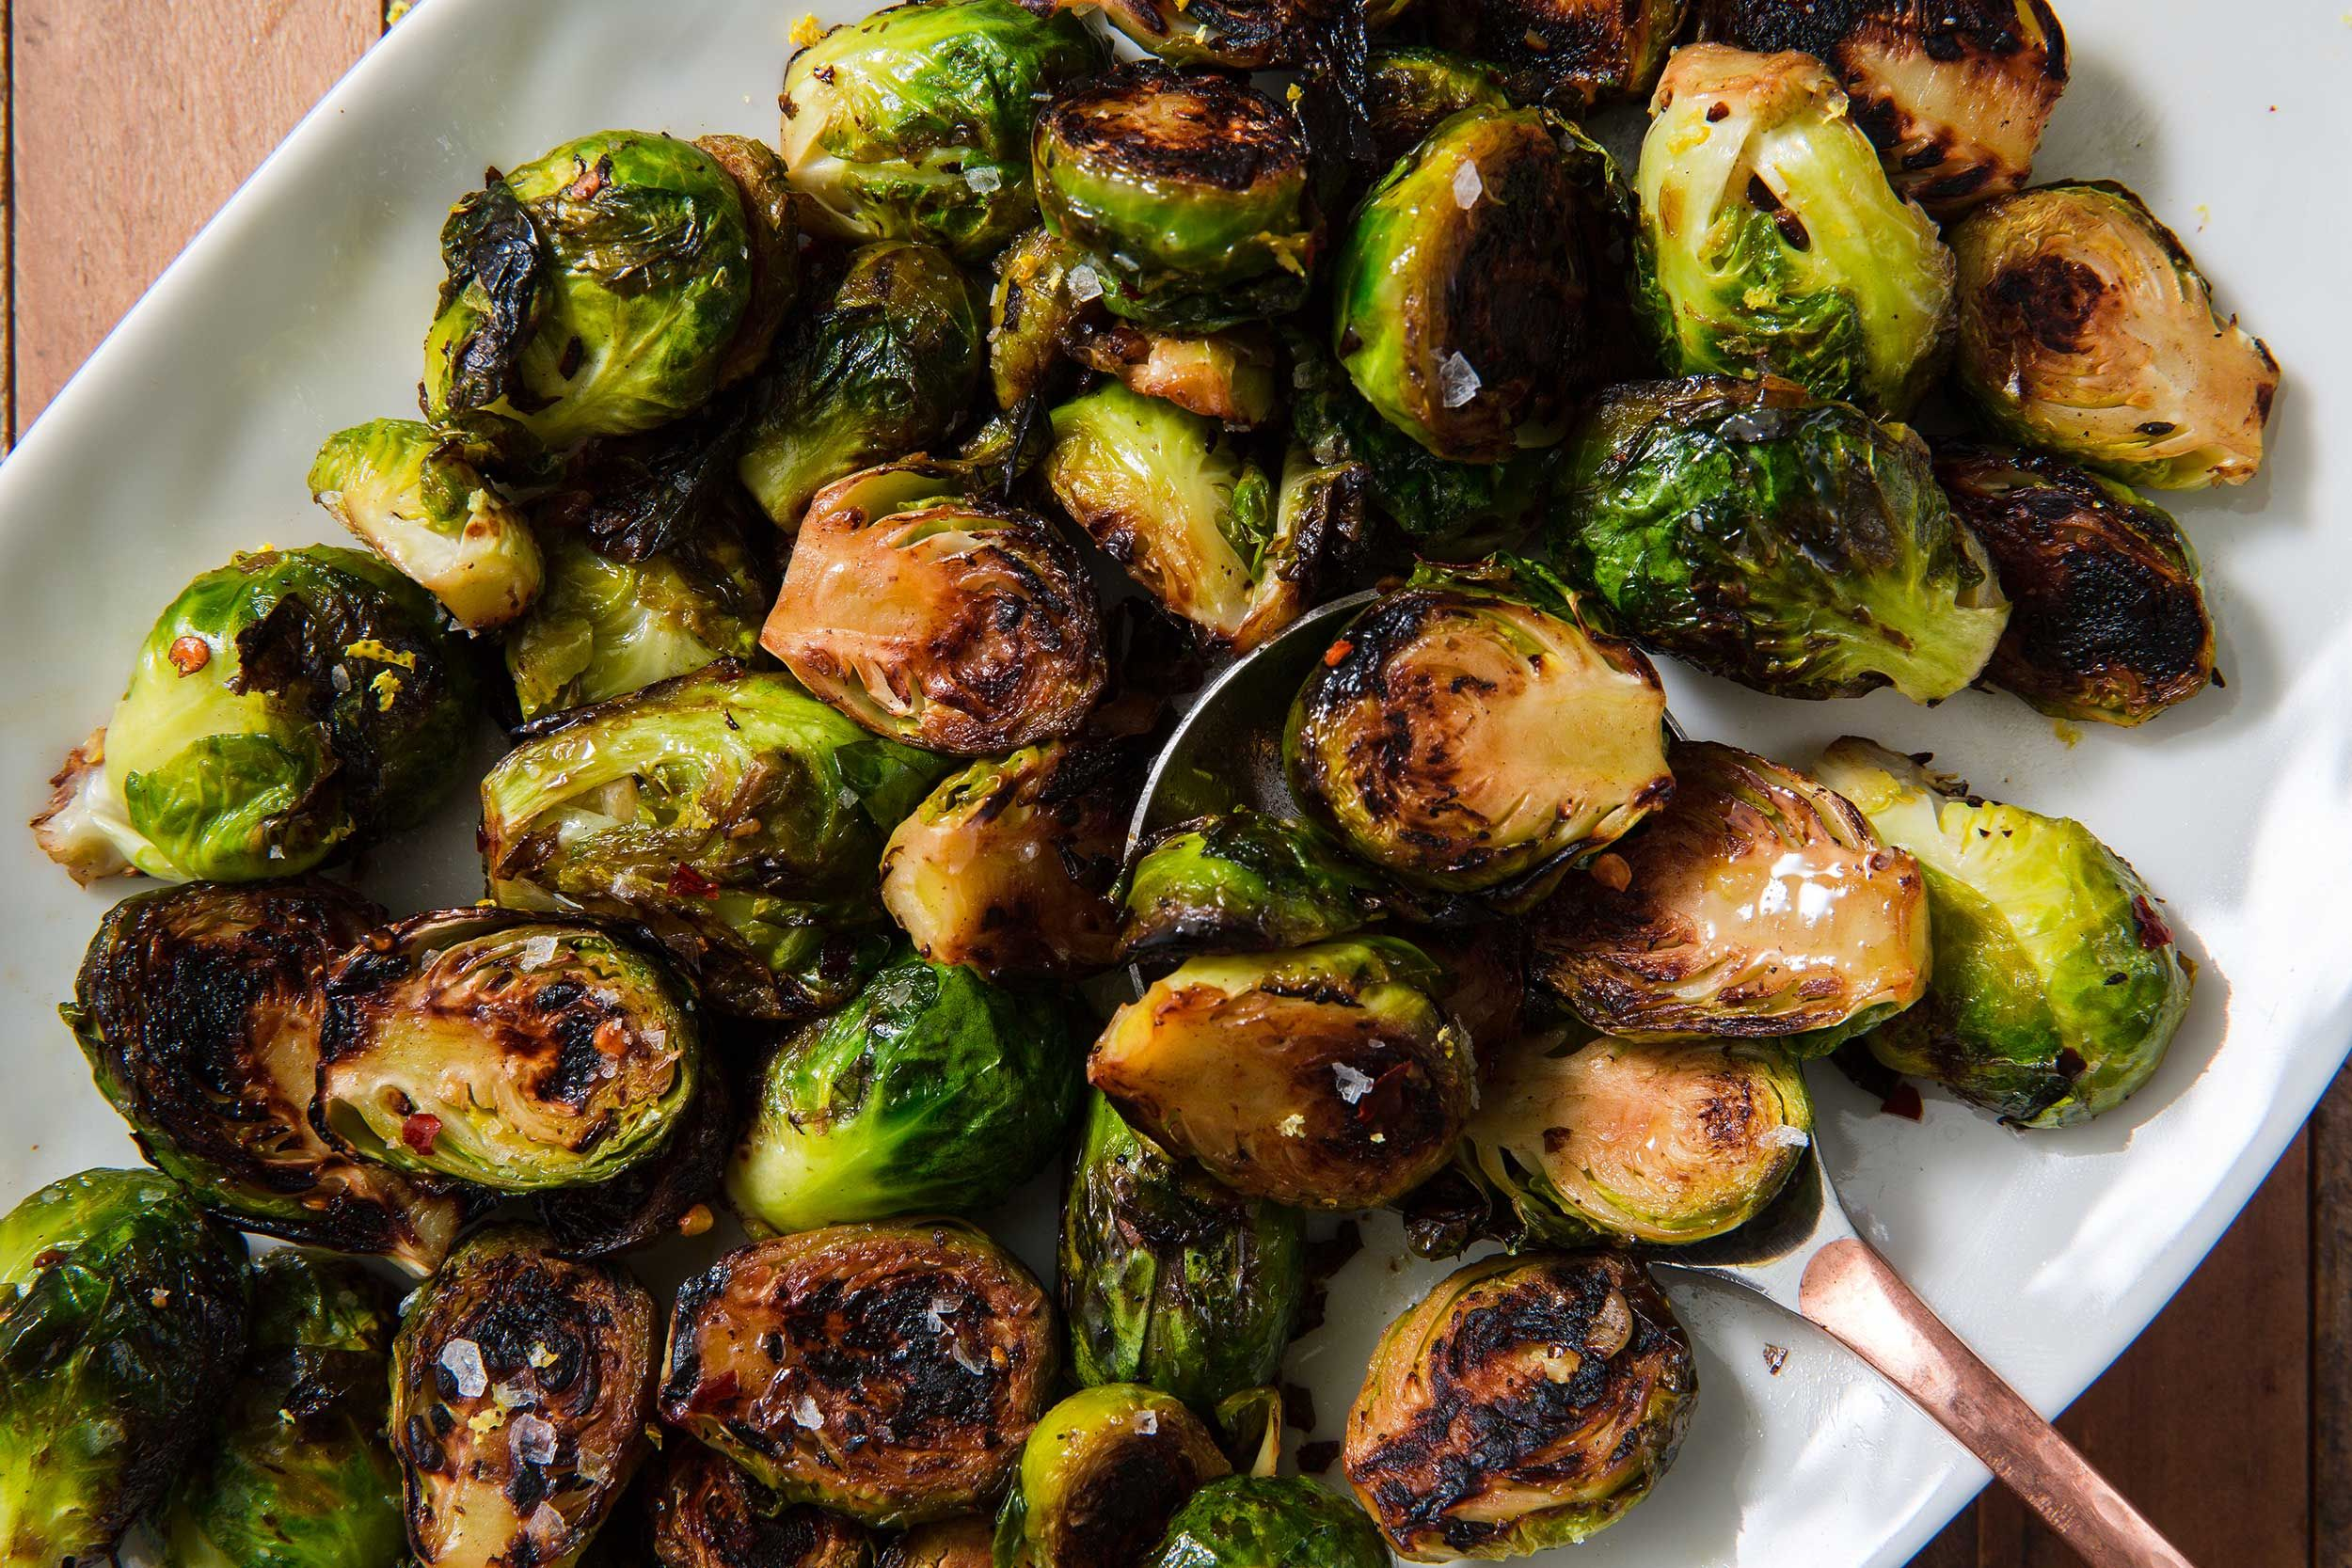 Sauteed Brussels Sprouts - A Healthy and Flavorful Companion to Your Brisket